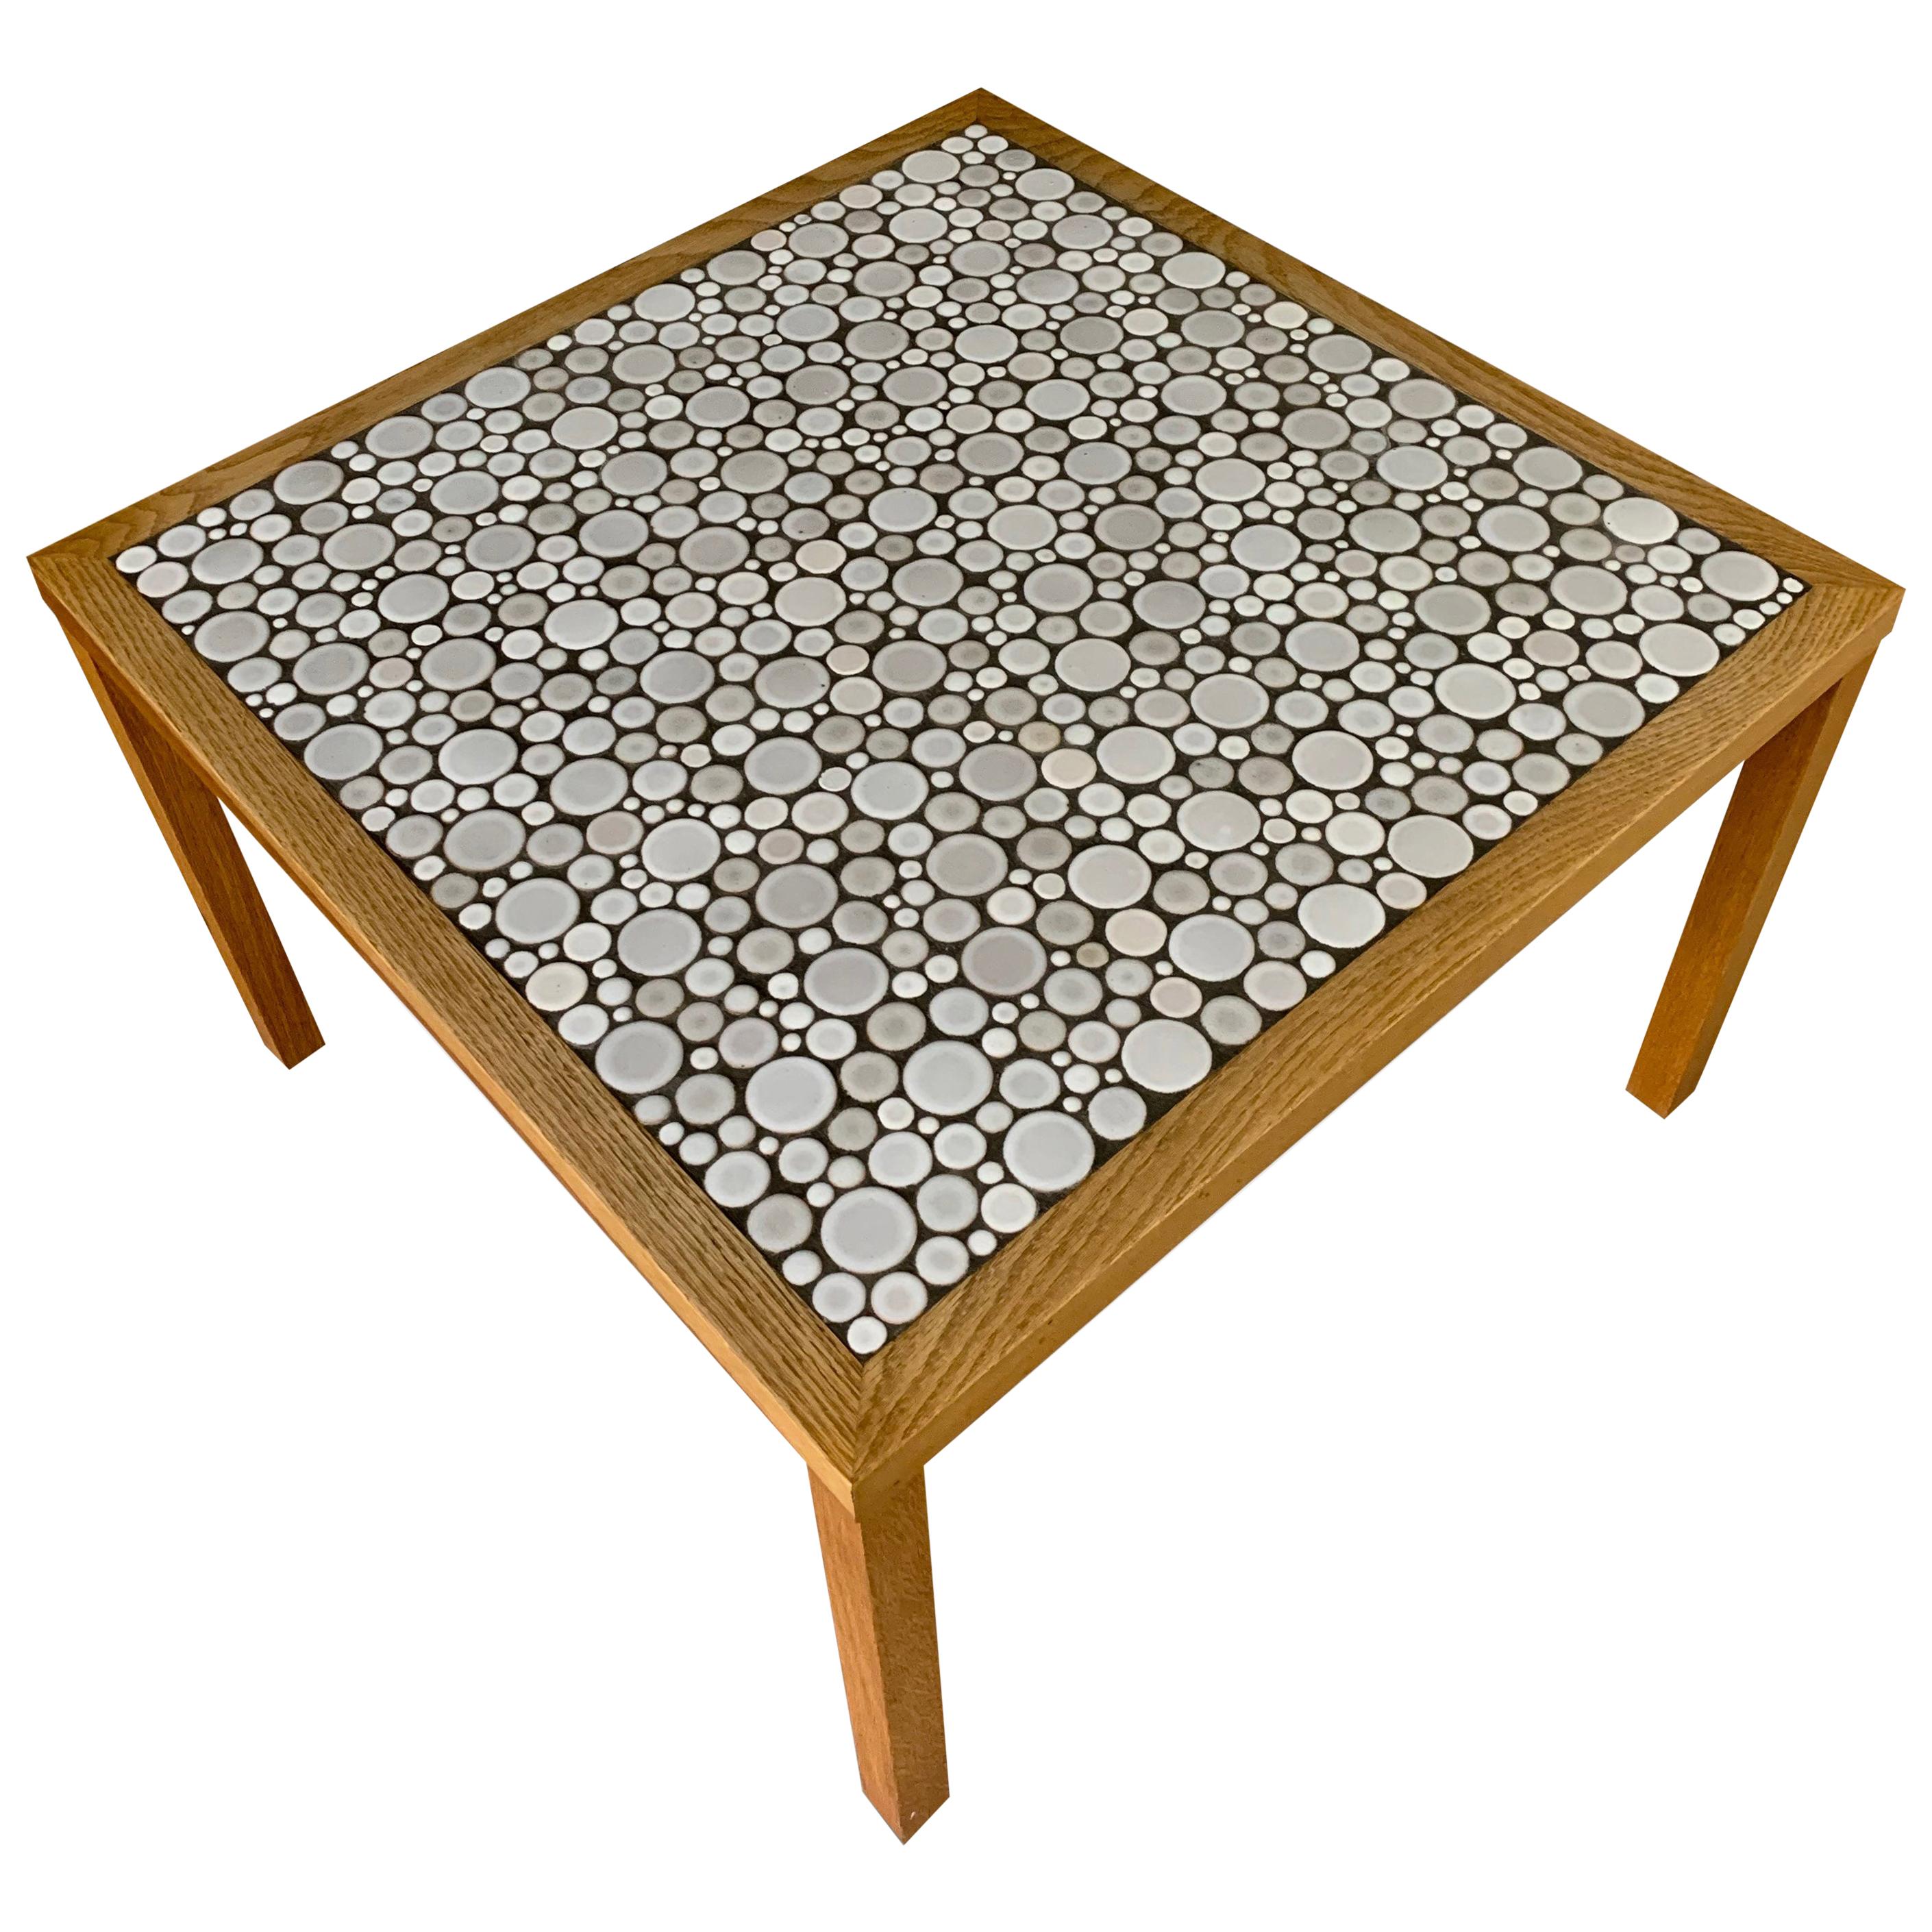 Martz Square Coffee Table in White Ceramic Circular Tiles Set in Charcoal Grout